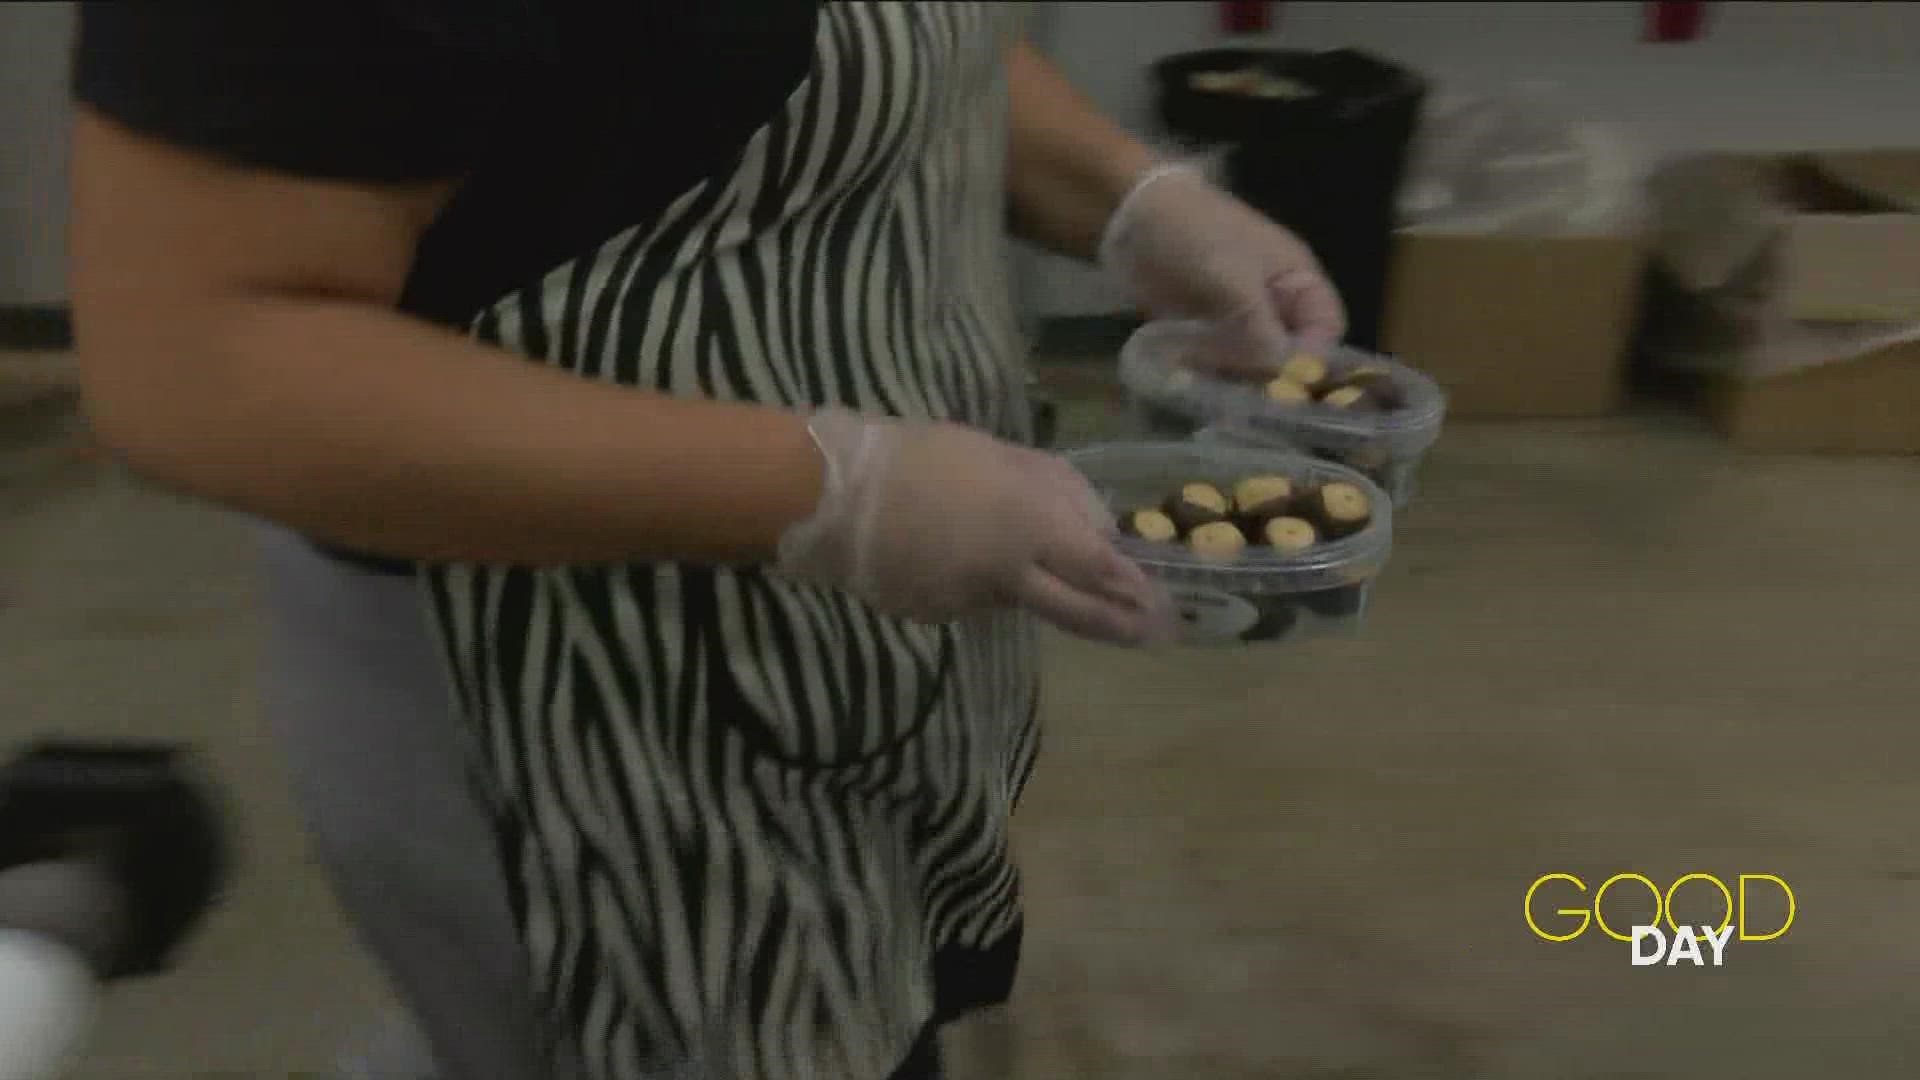 Jon Monk checks out Marsha's Buckeyes in Perrysburg, which produces some of Ohio's most iconic sweet treats.